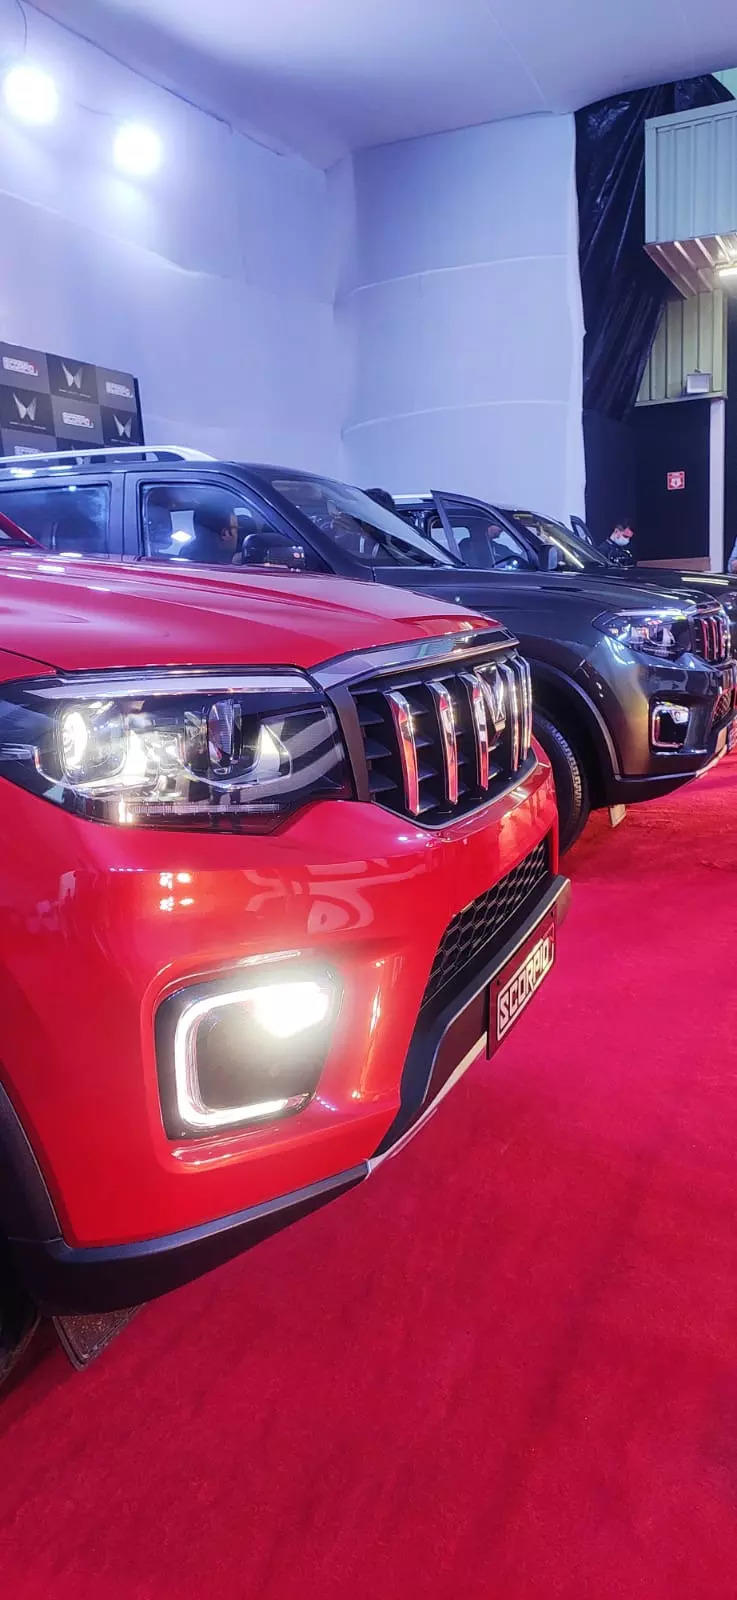 Mahindra launches Scorpio-N, price starts at INR 11.99 lakh for first 25k bookings